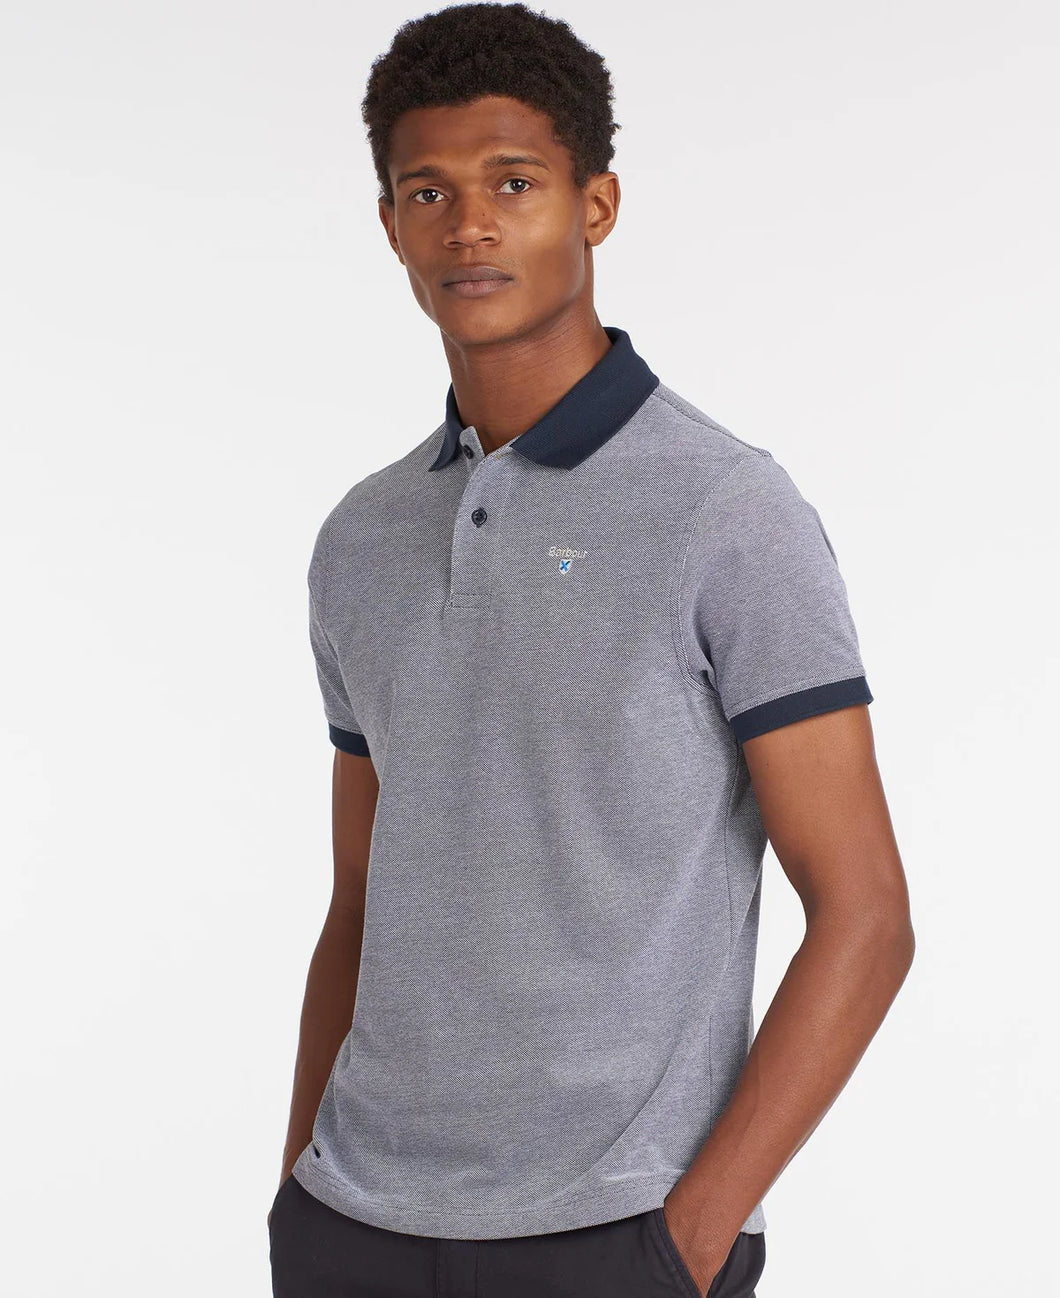 BARBOUR Sports Polo Mix Shirt - Men's - Midnight